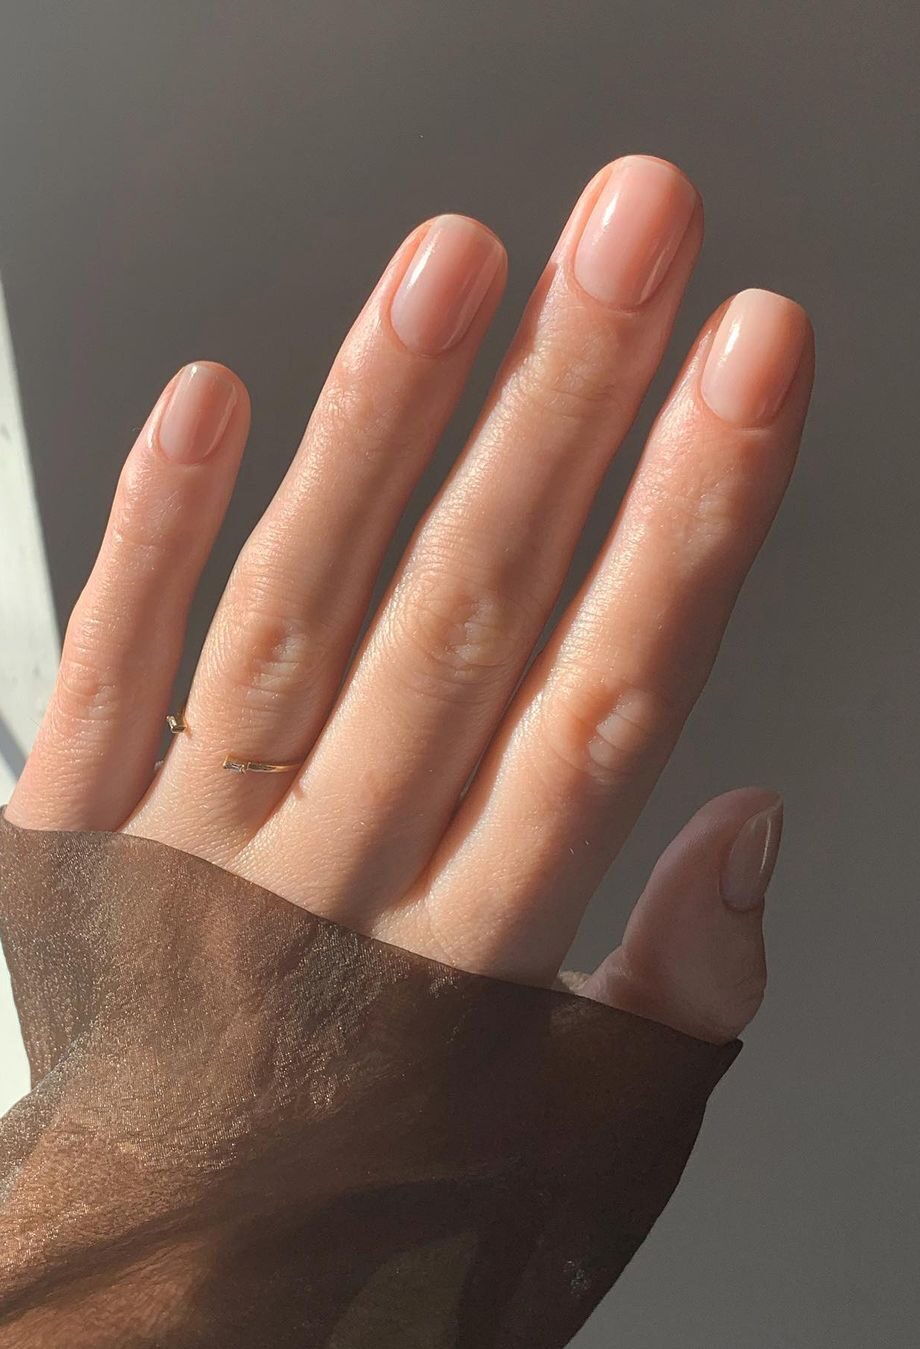 barely-there-manicure-πώς-να-υιοθετήσετε-το-πιο-chic-nail-trend-τώρα-273645